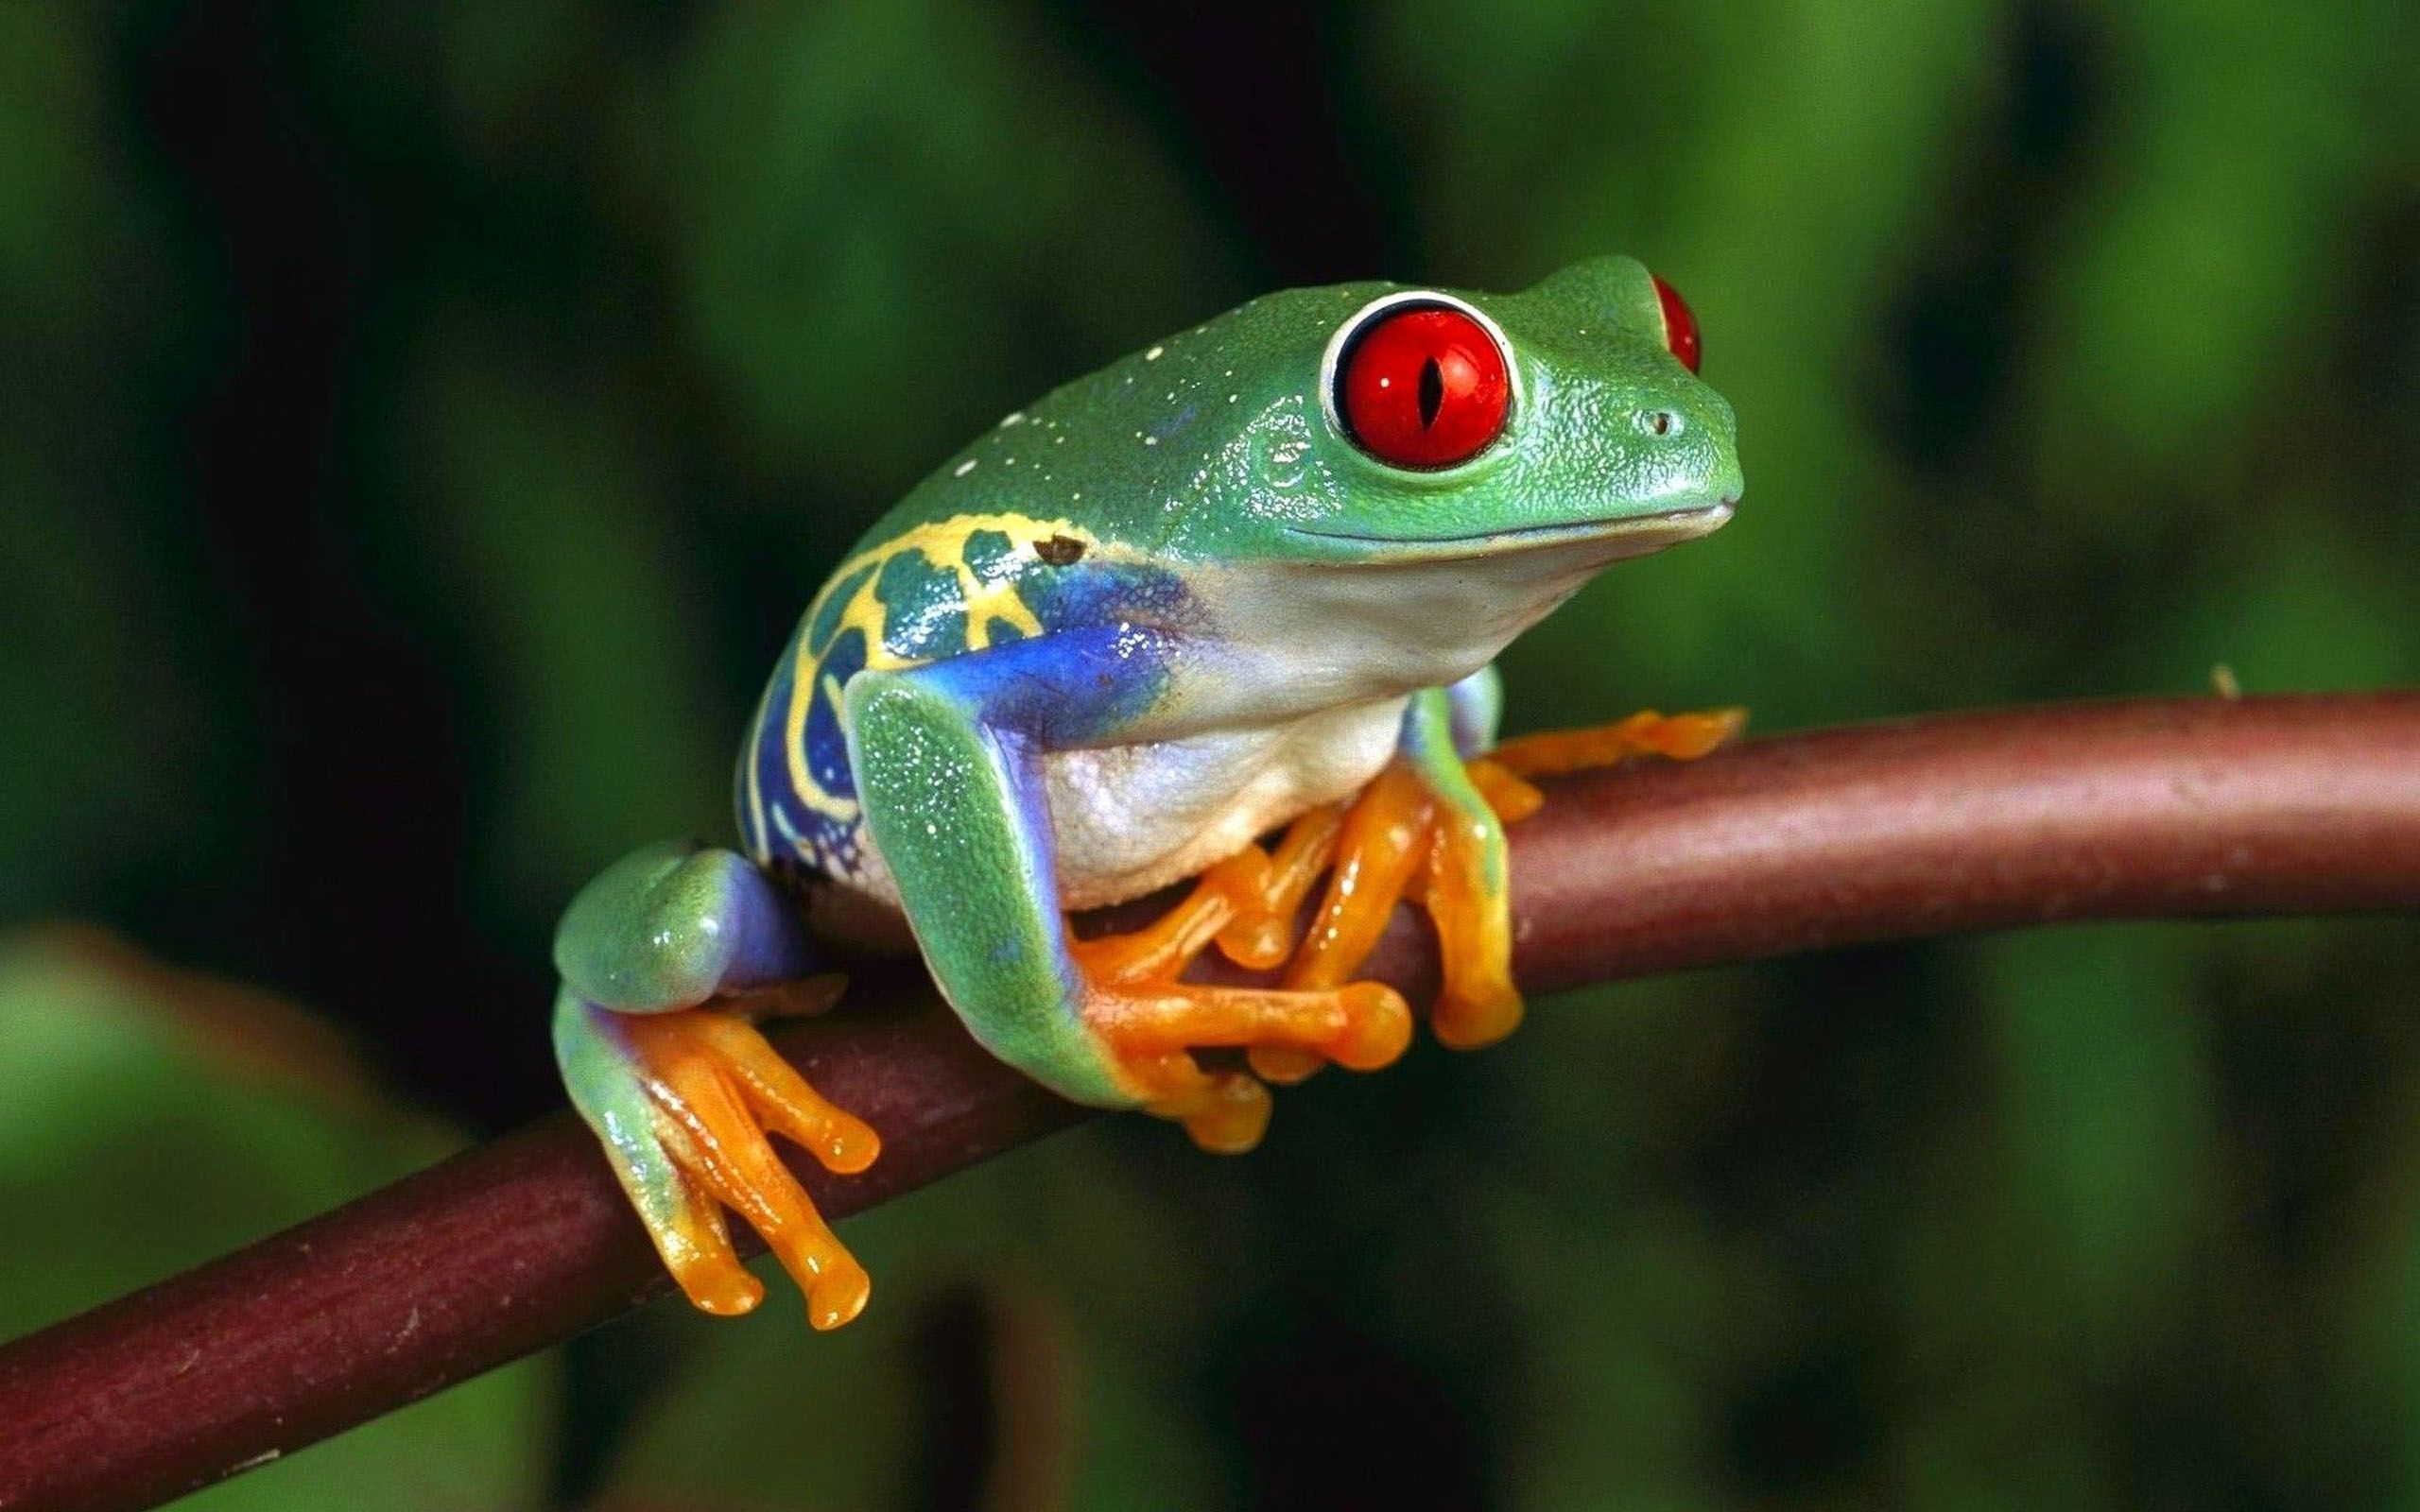 Green Frog With Red Eyes 4k Ultra HD Wallpaper For Computer And Laptop, Wallpaper13.com